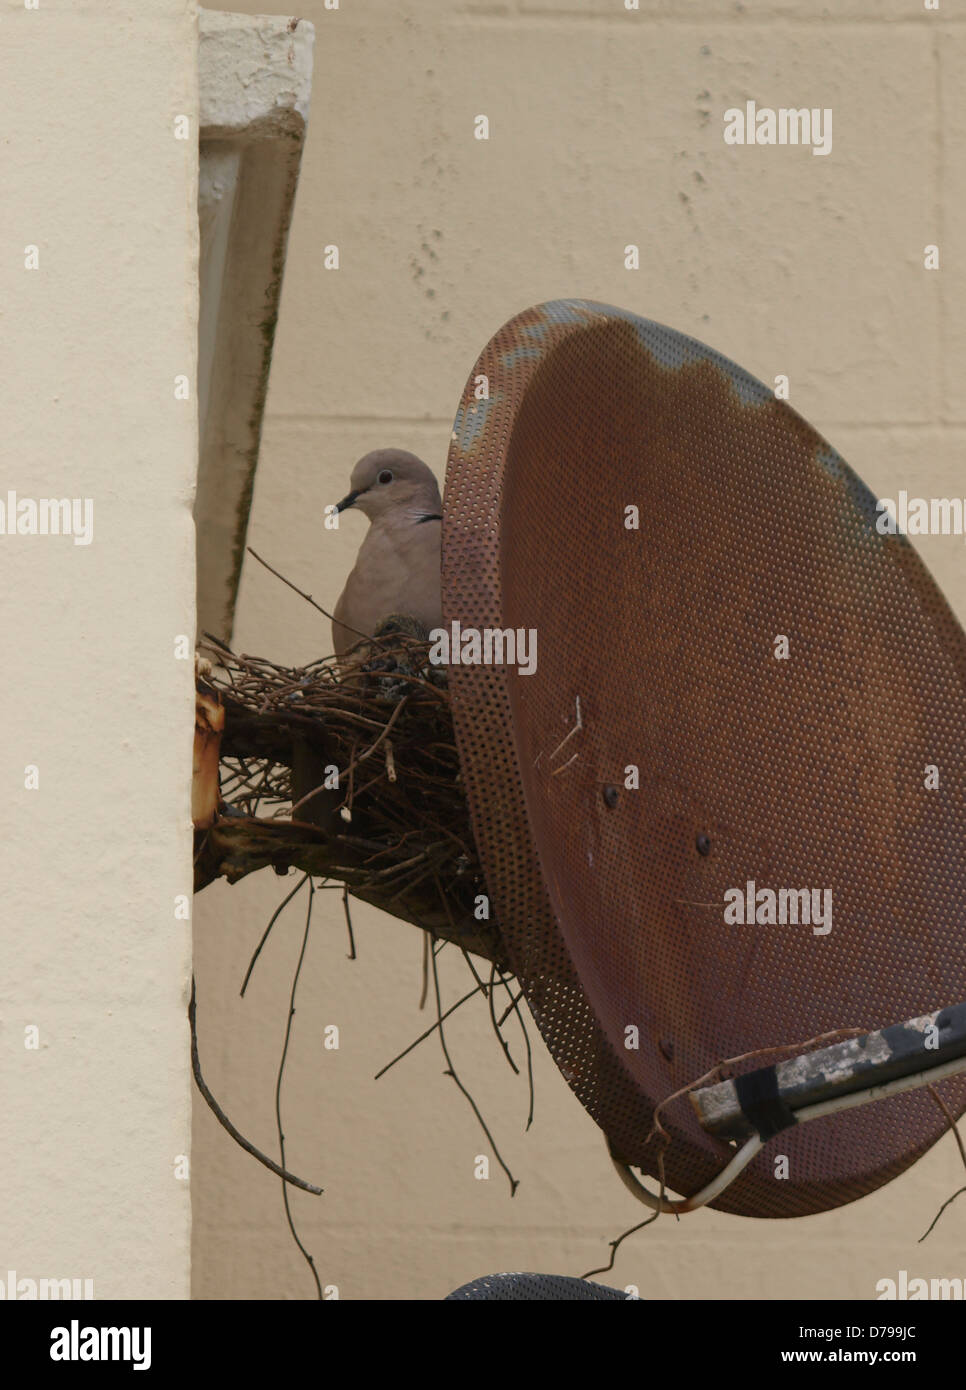 Collared Dove, Steptopelia decaocto nesting behind a old Sky satellite dish Stock Photo